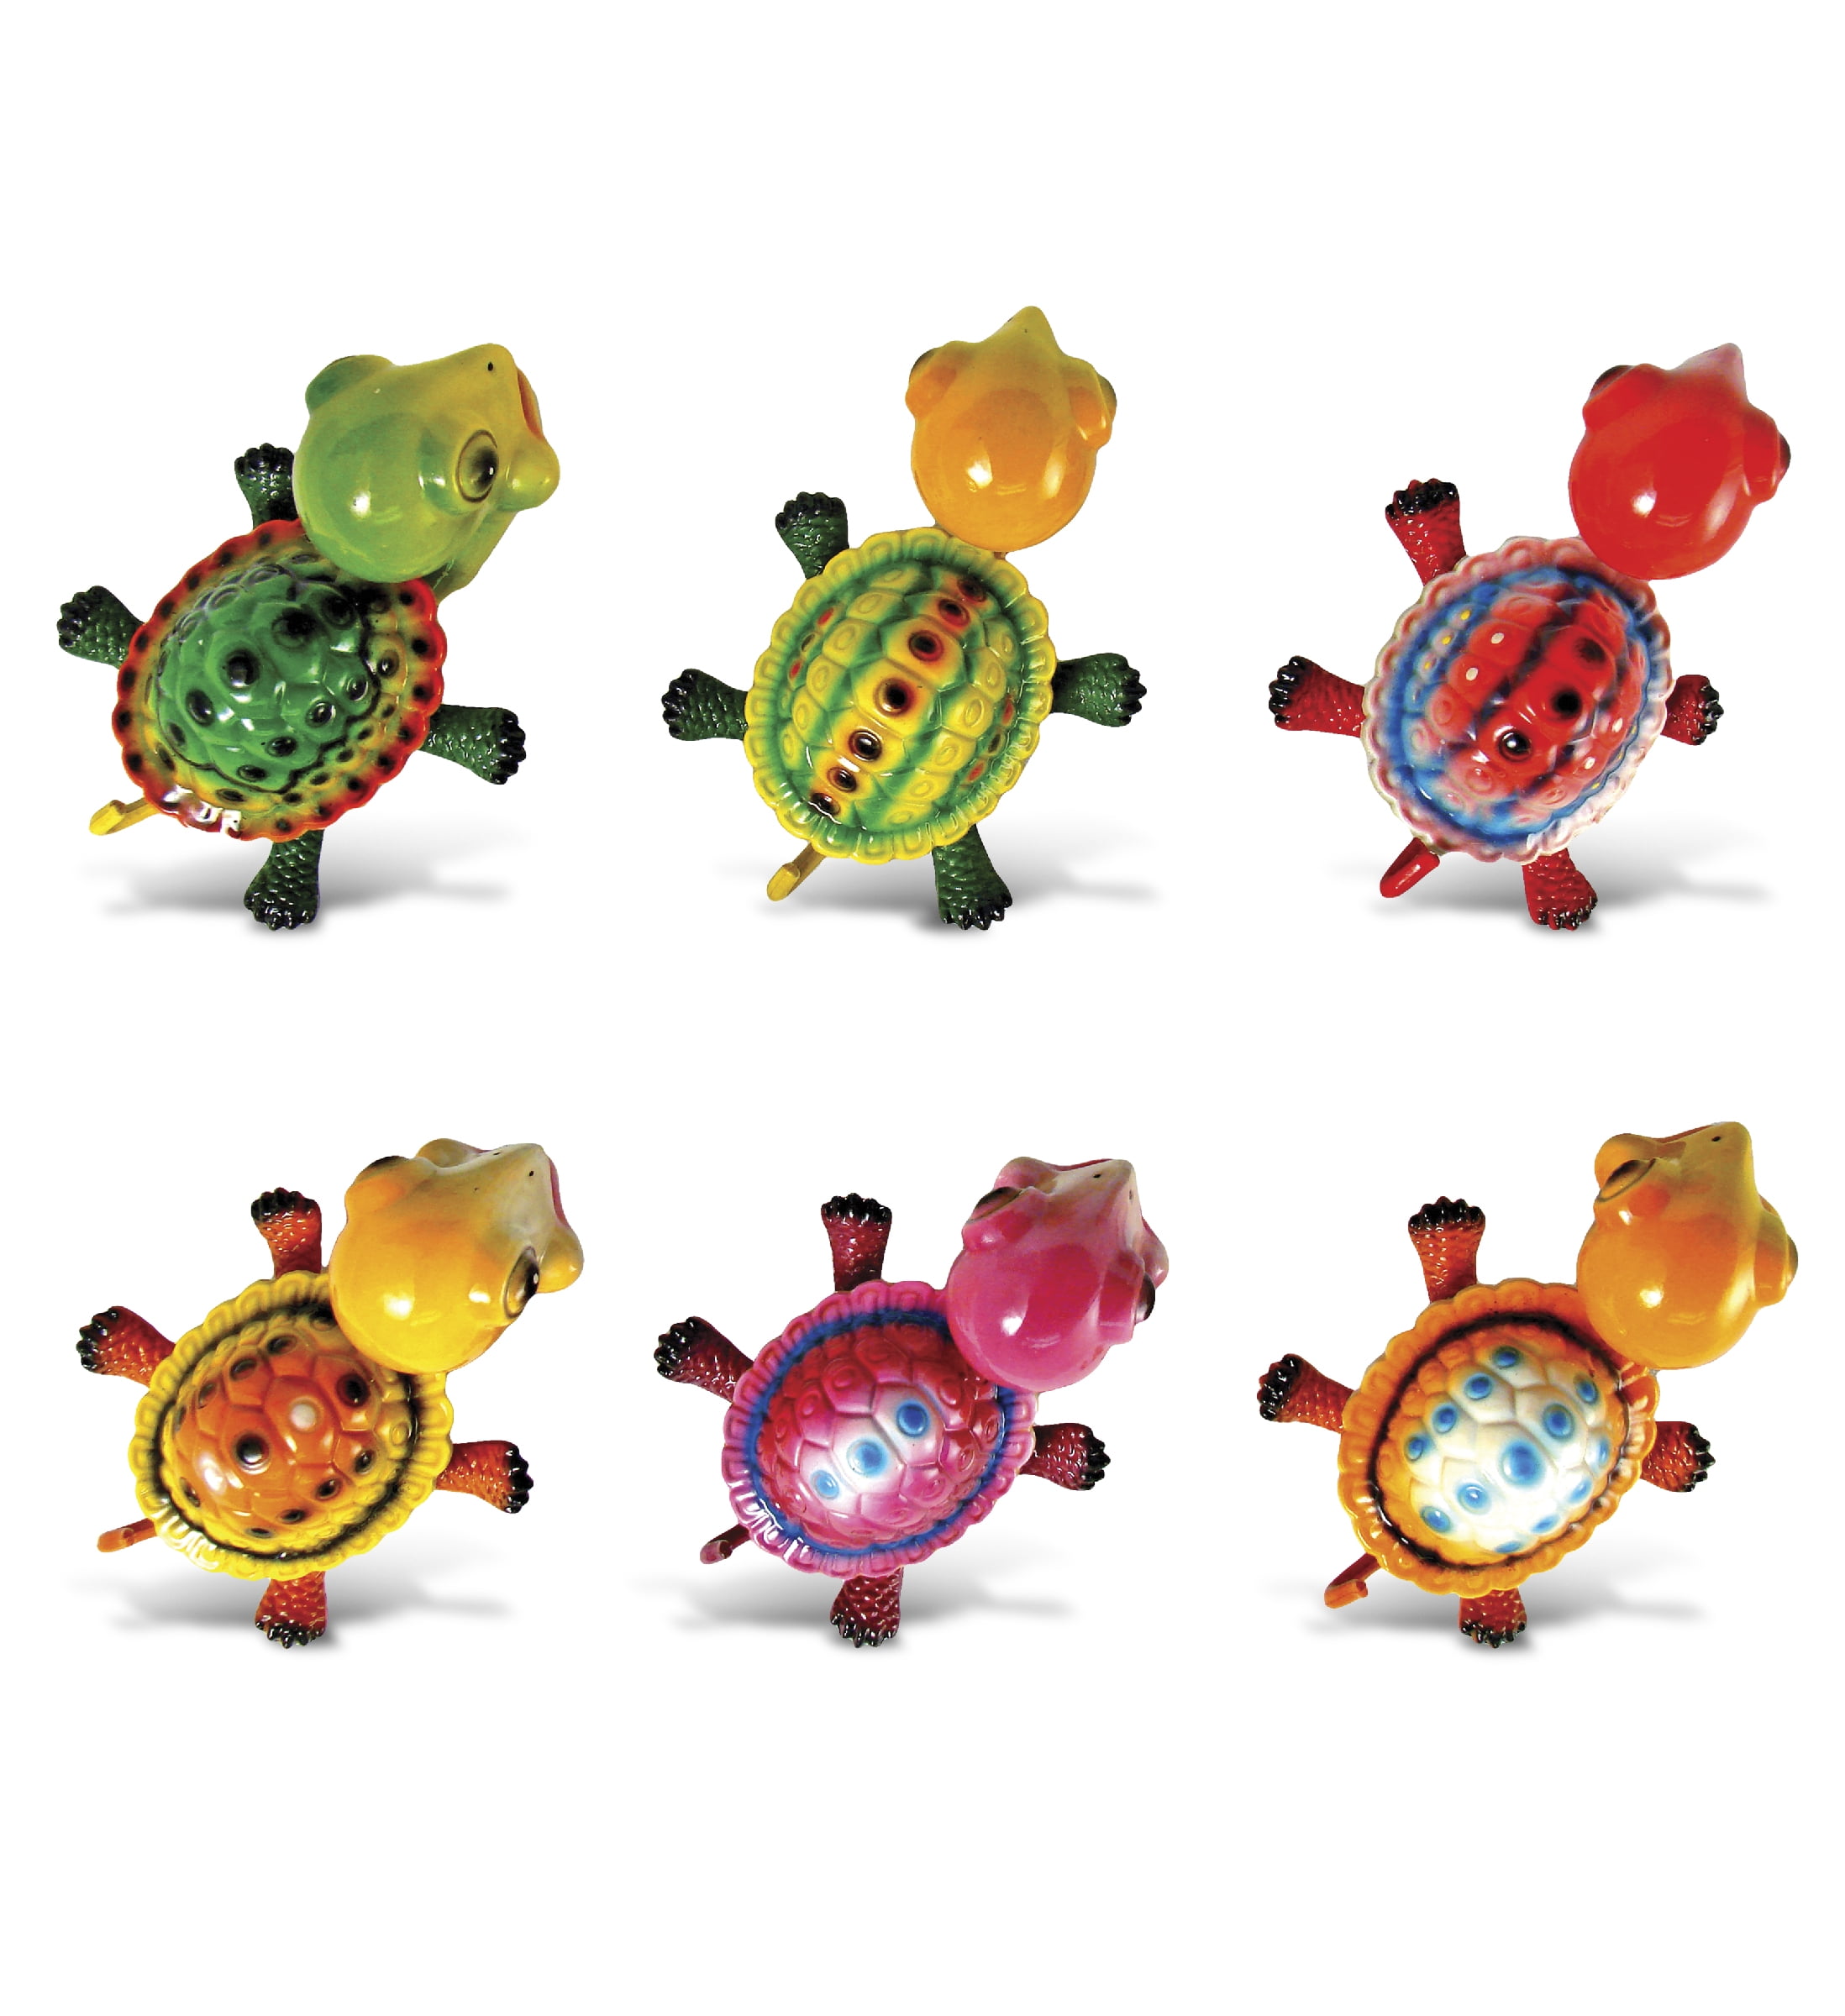 CoTa Global Land Turtle Refrigerator Bobble Magnets Set of 6 - Assorted  Color Fun Cute Tortoise Animal Bobble Magnets For Kitchen Fridge, Lockers  Home Decor Cool Office & Decorative Novelty - 6 Pack 